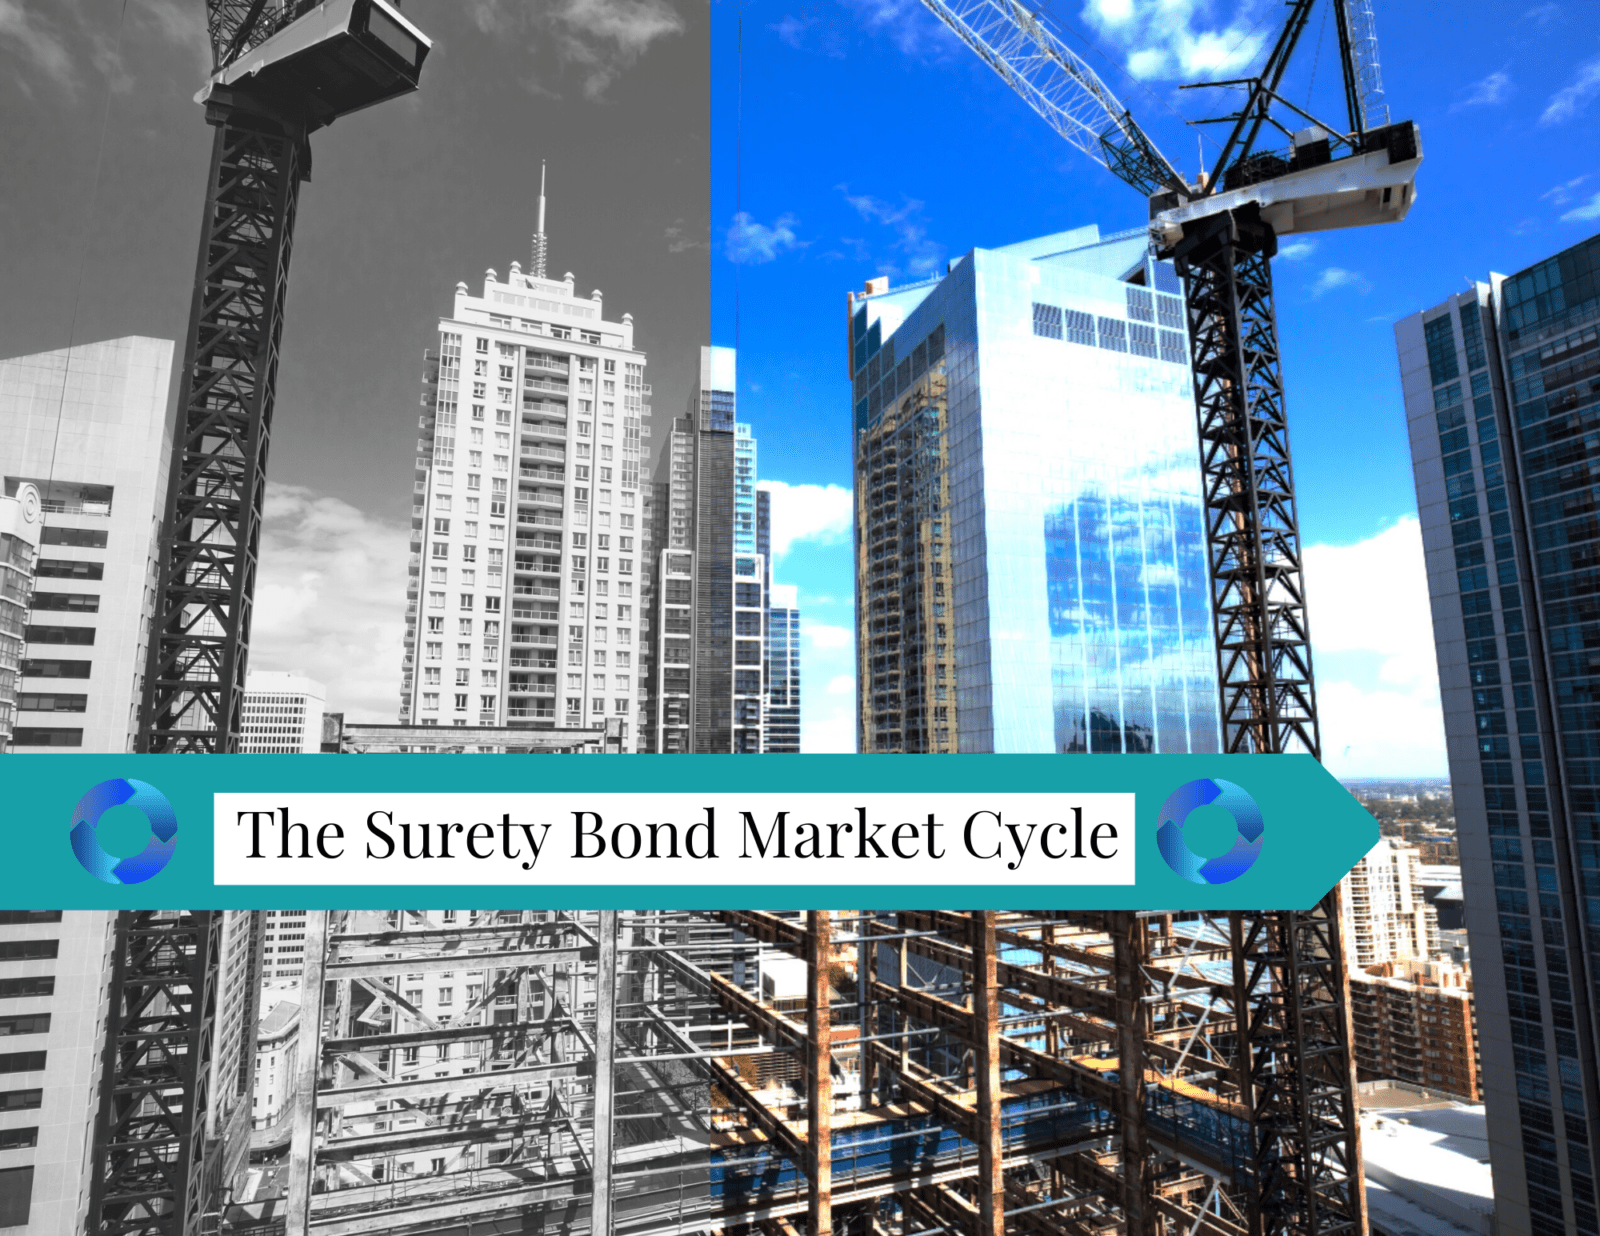 Surety Bonds - Half Color, half black and white picture of construction cranes and buildings with Surety market cycle on it